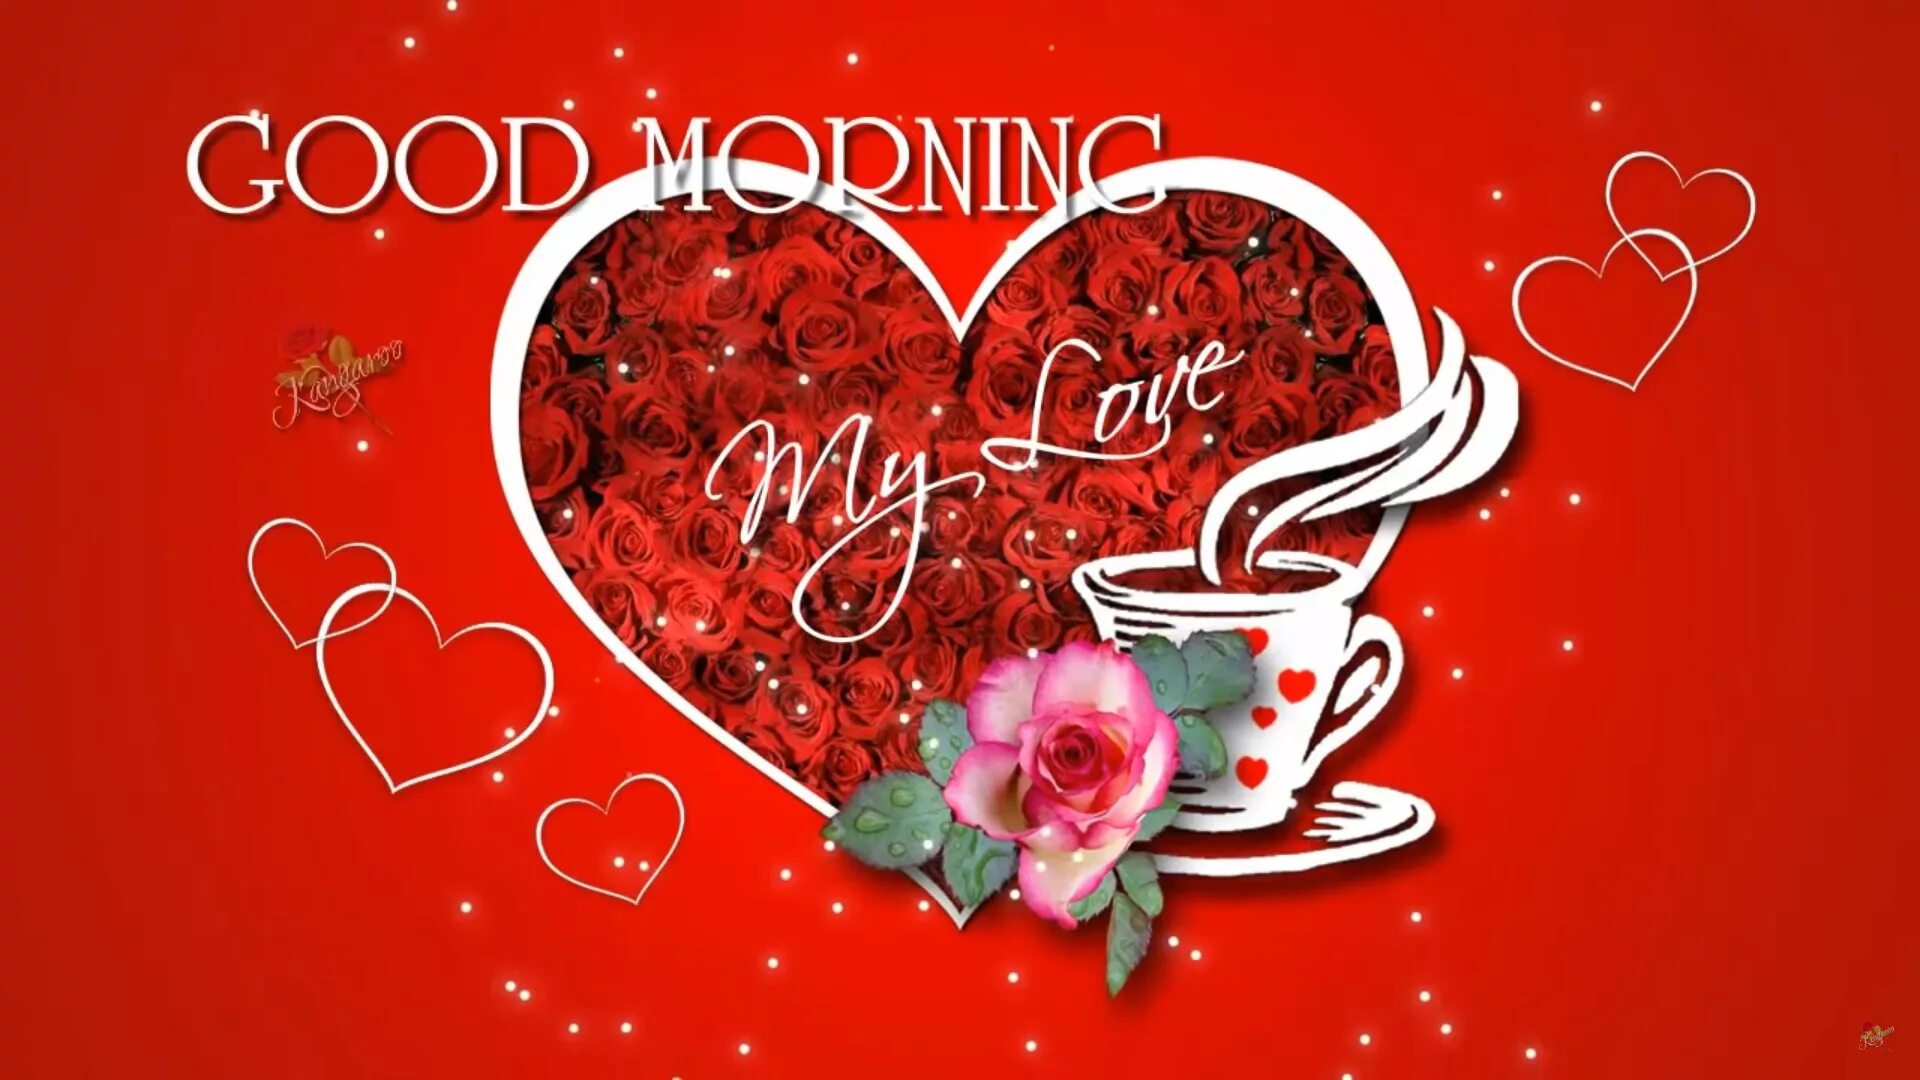 Good morning my. Good morning Love. Good morning my Love. Good morning my Love картинки. Good morning have a blessed Day my Love.